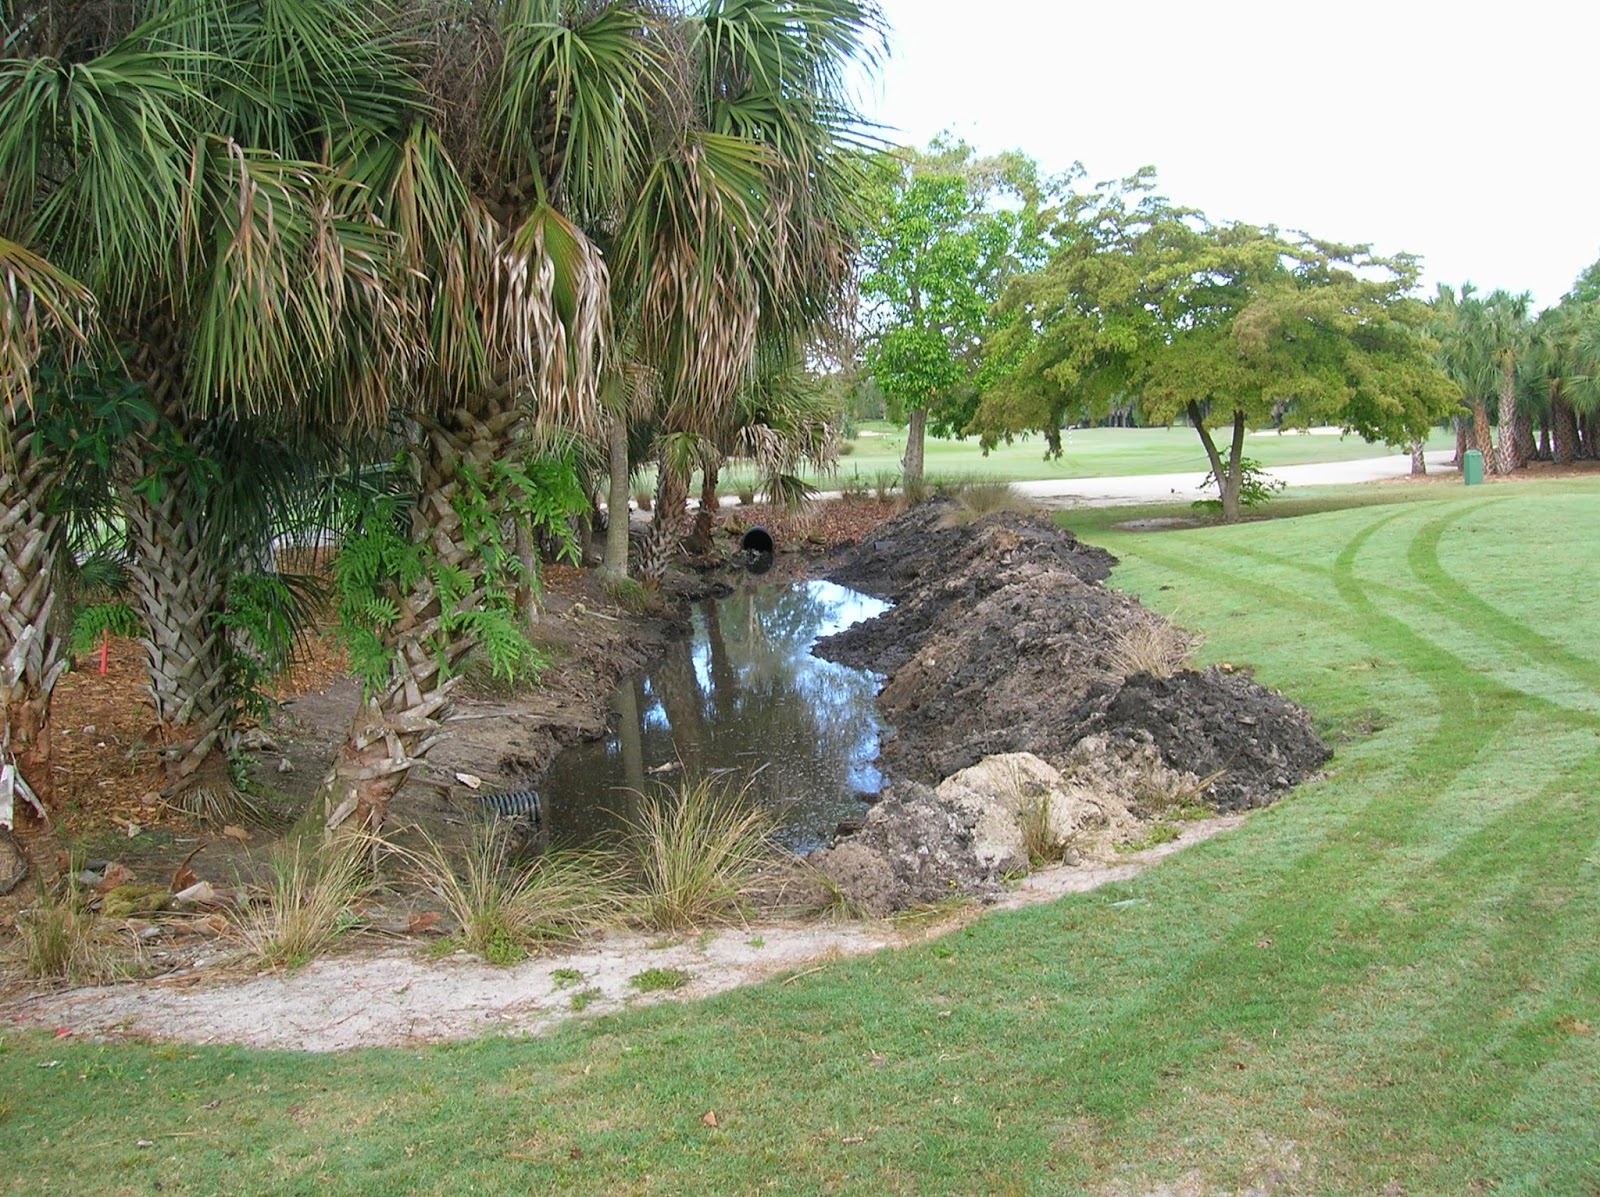 Completed drainage project